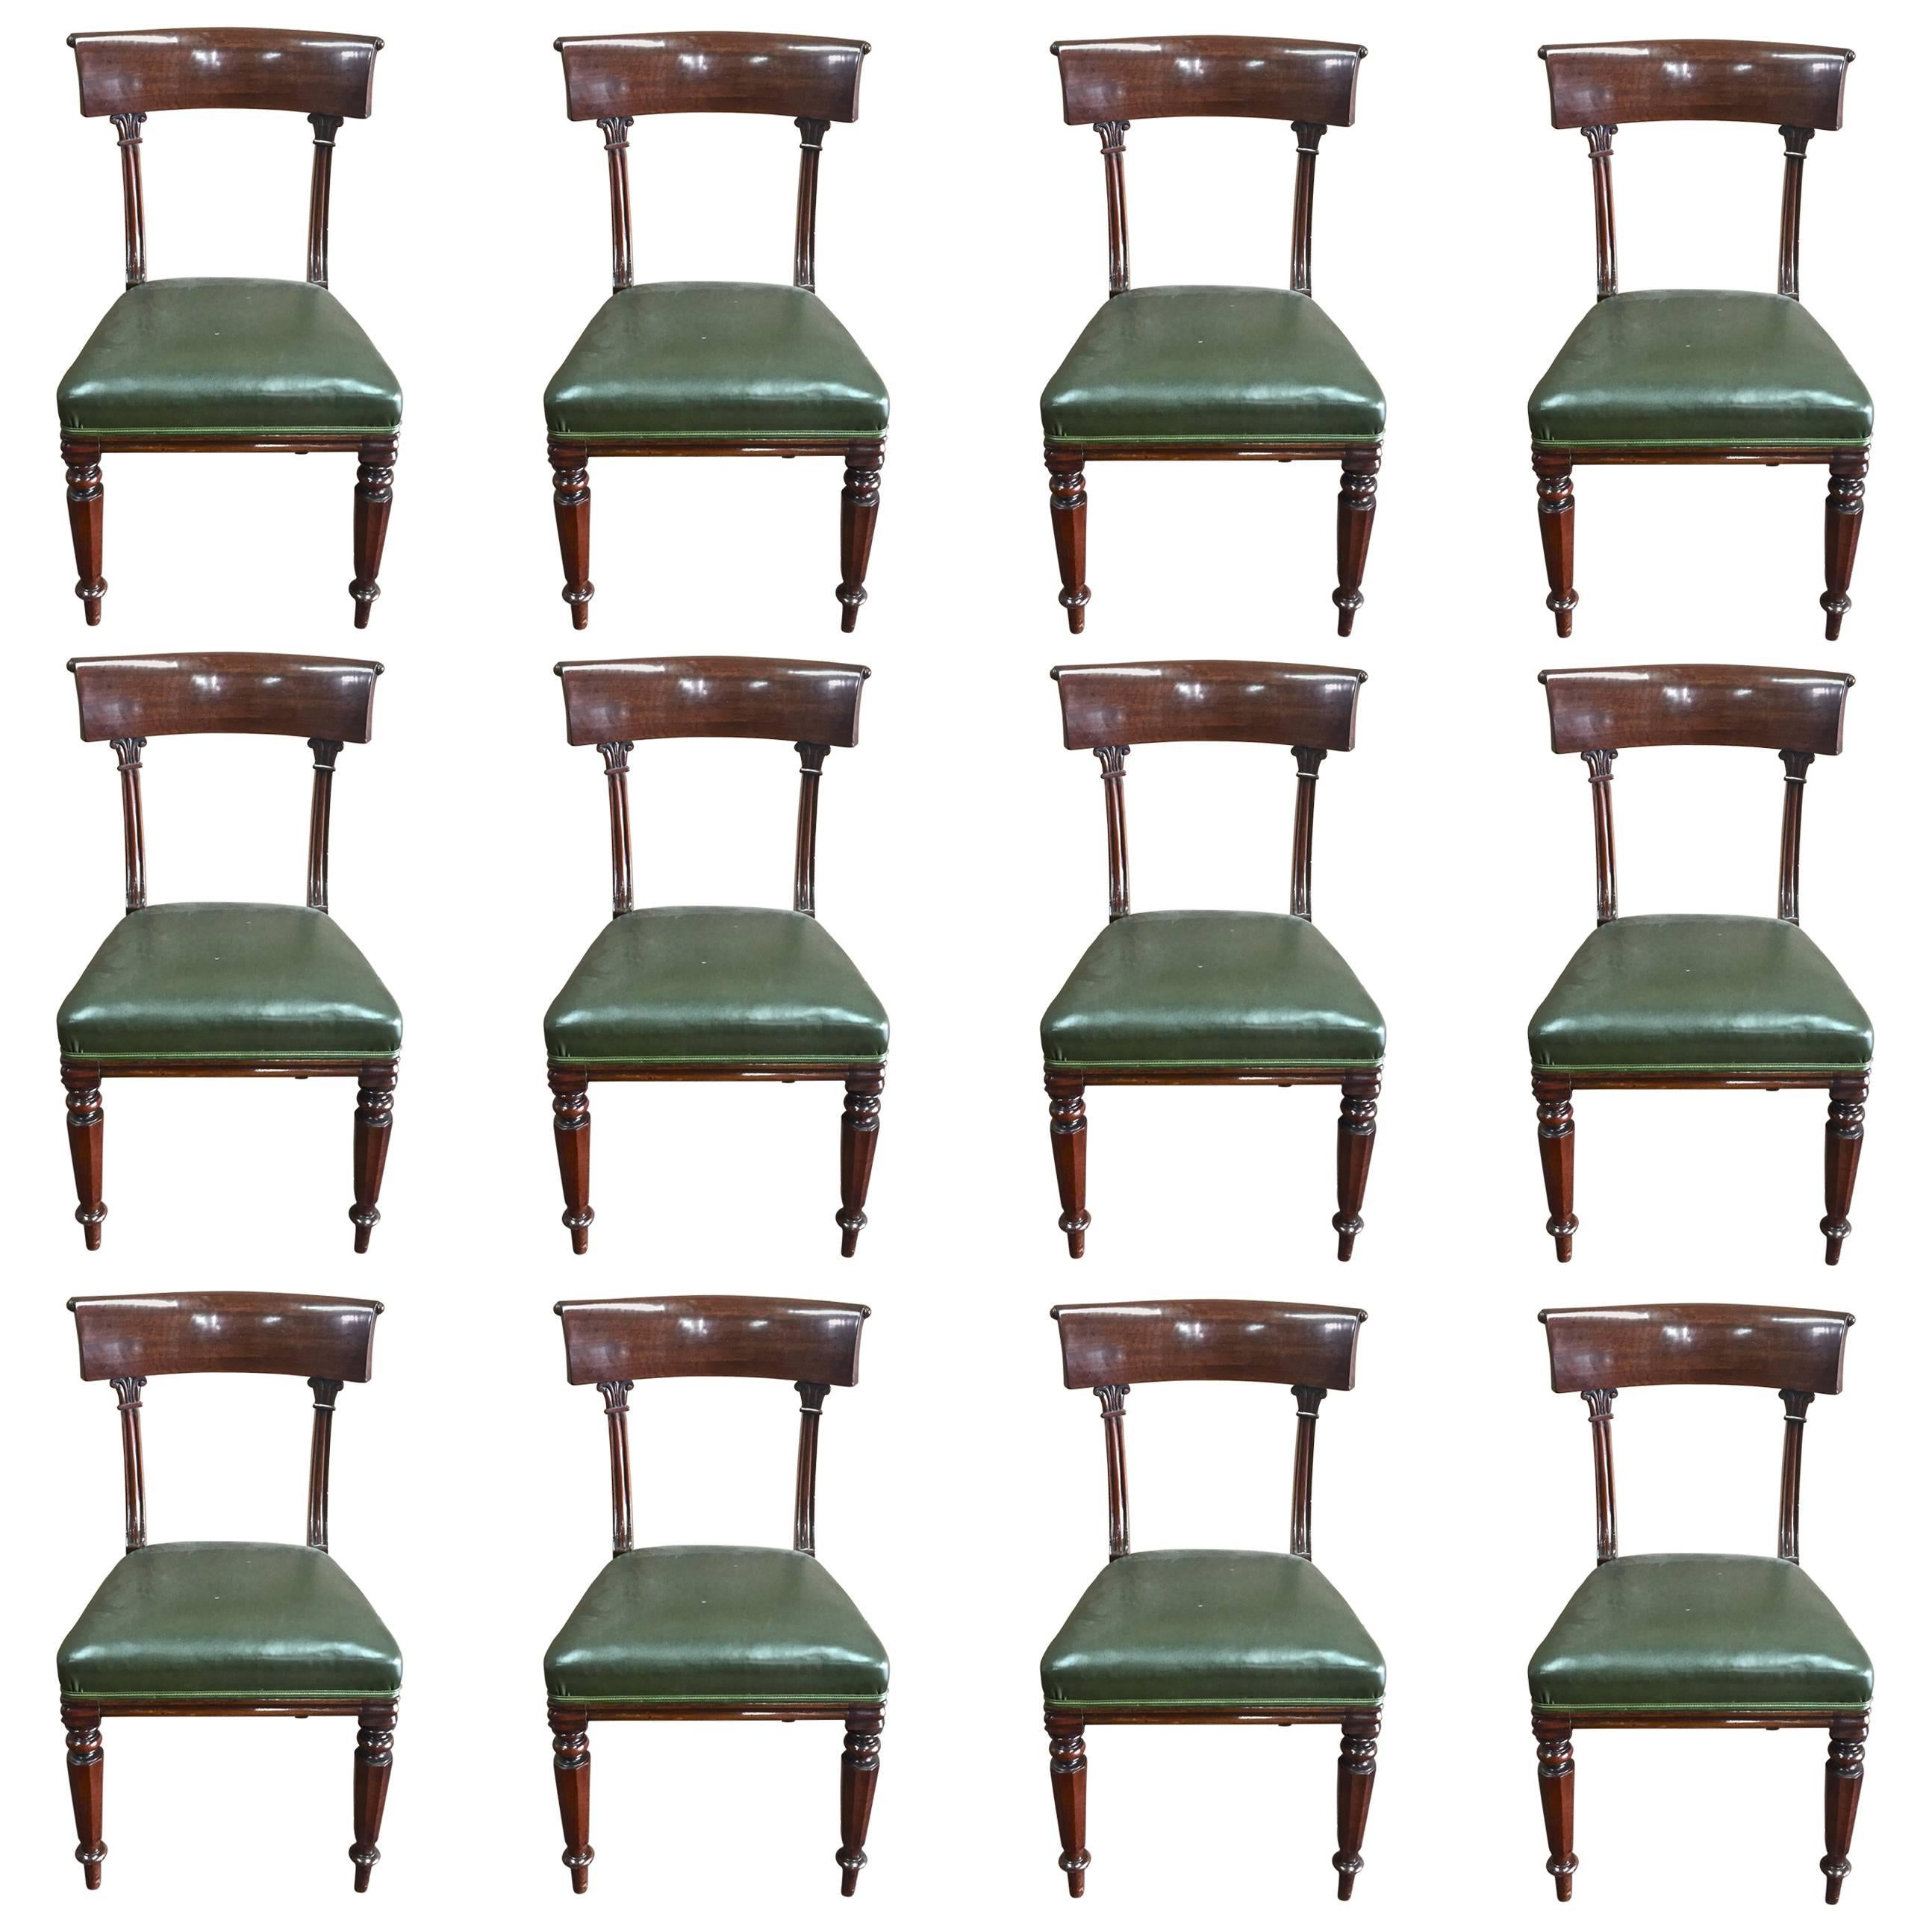 Set of 12 Period Regency Dining Chairs